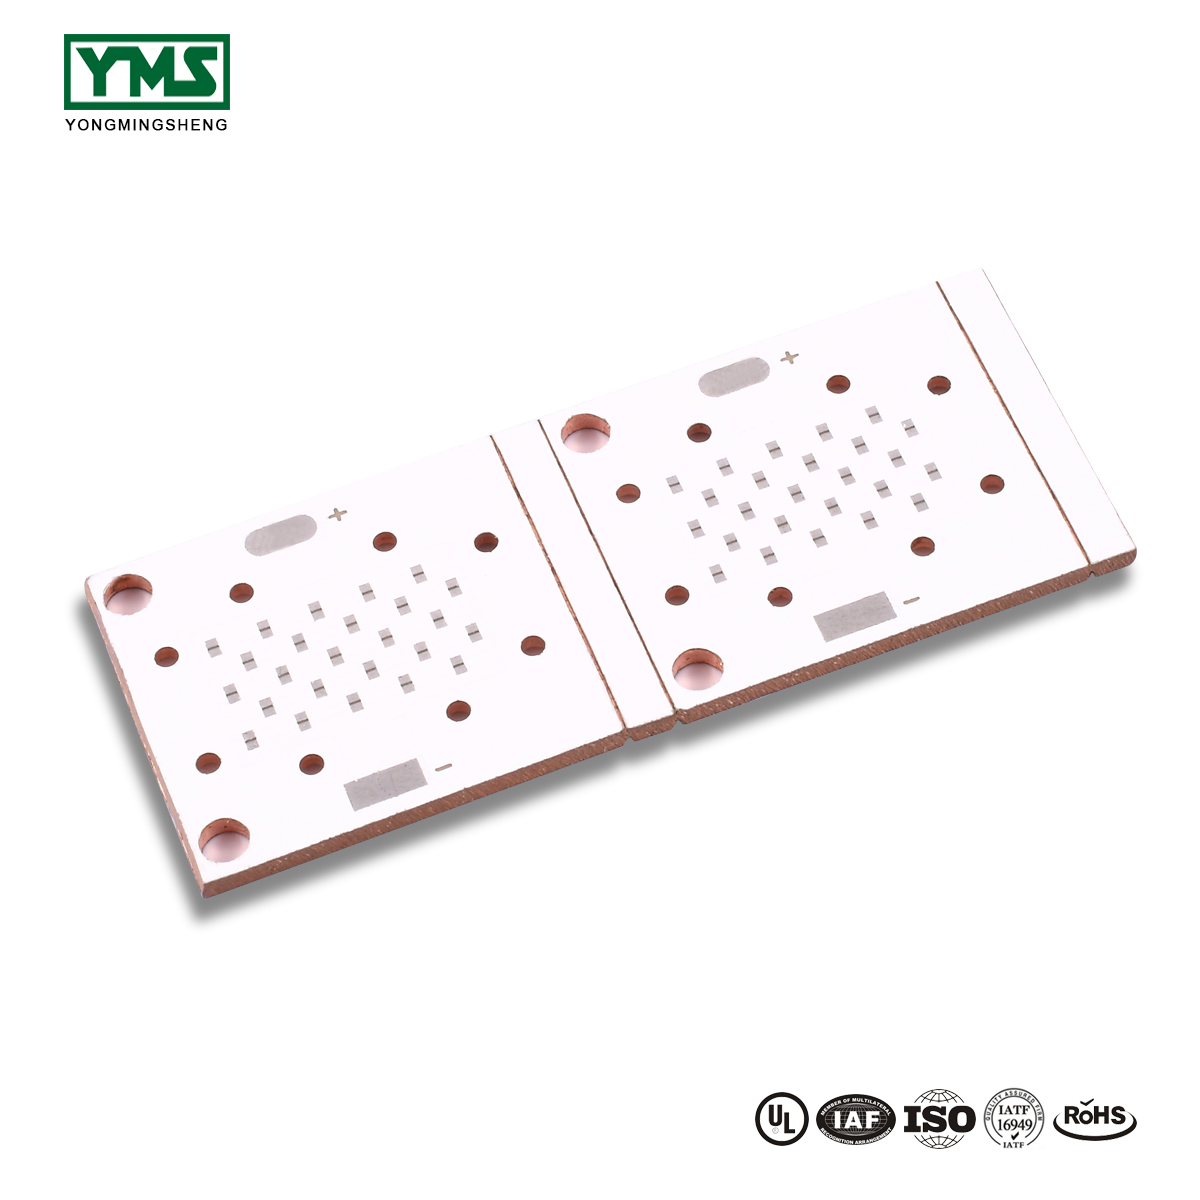 Chinese Professional 1layer Led Strip Lighting Pcb 94v - 1 Layer Thermoelectric Copper base Board | YMSPCB – Yongmingsheng